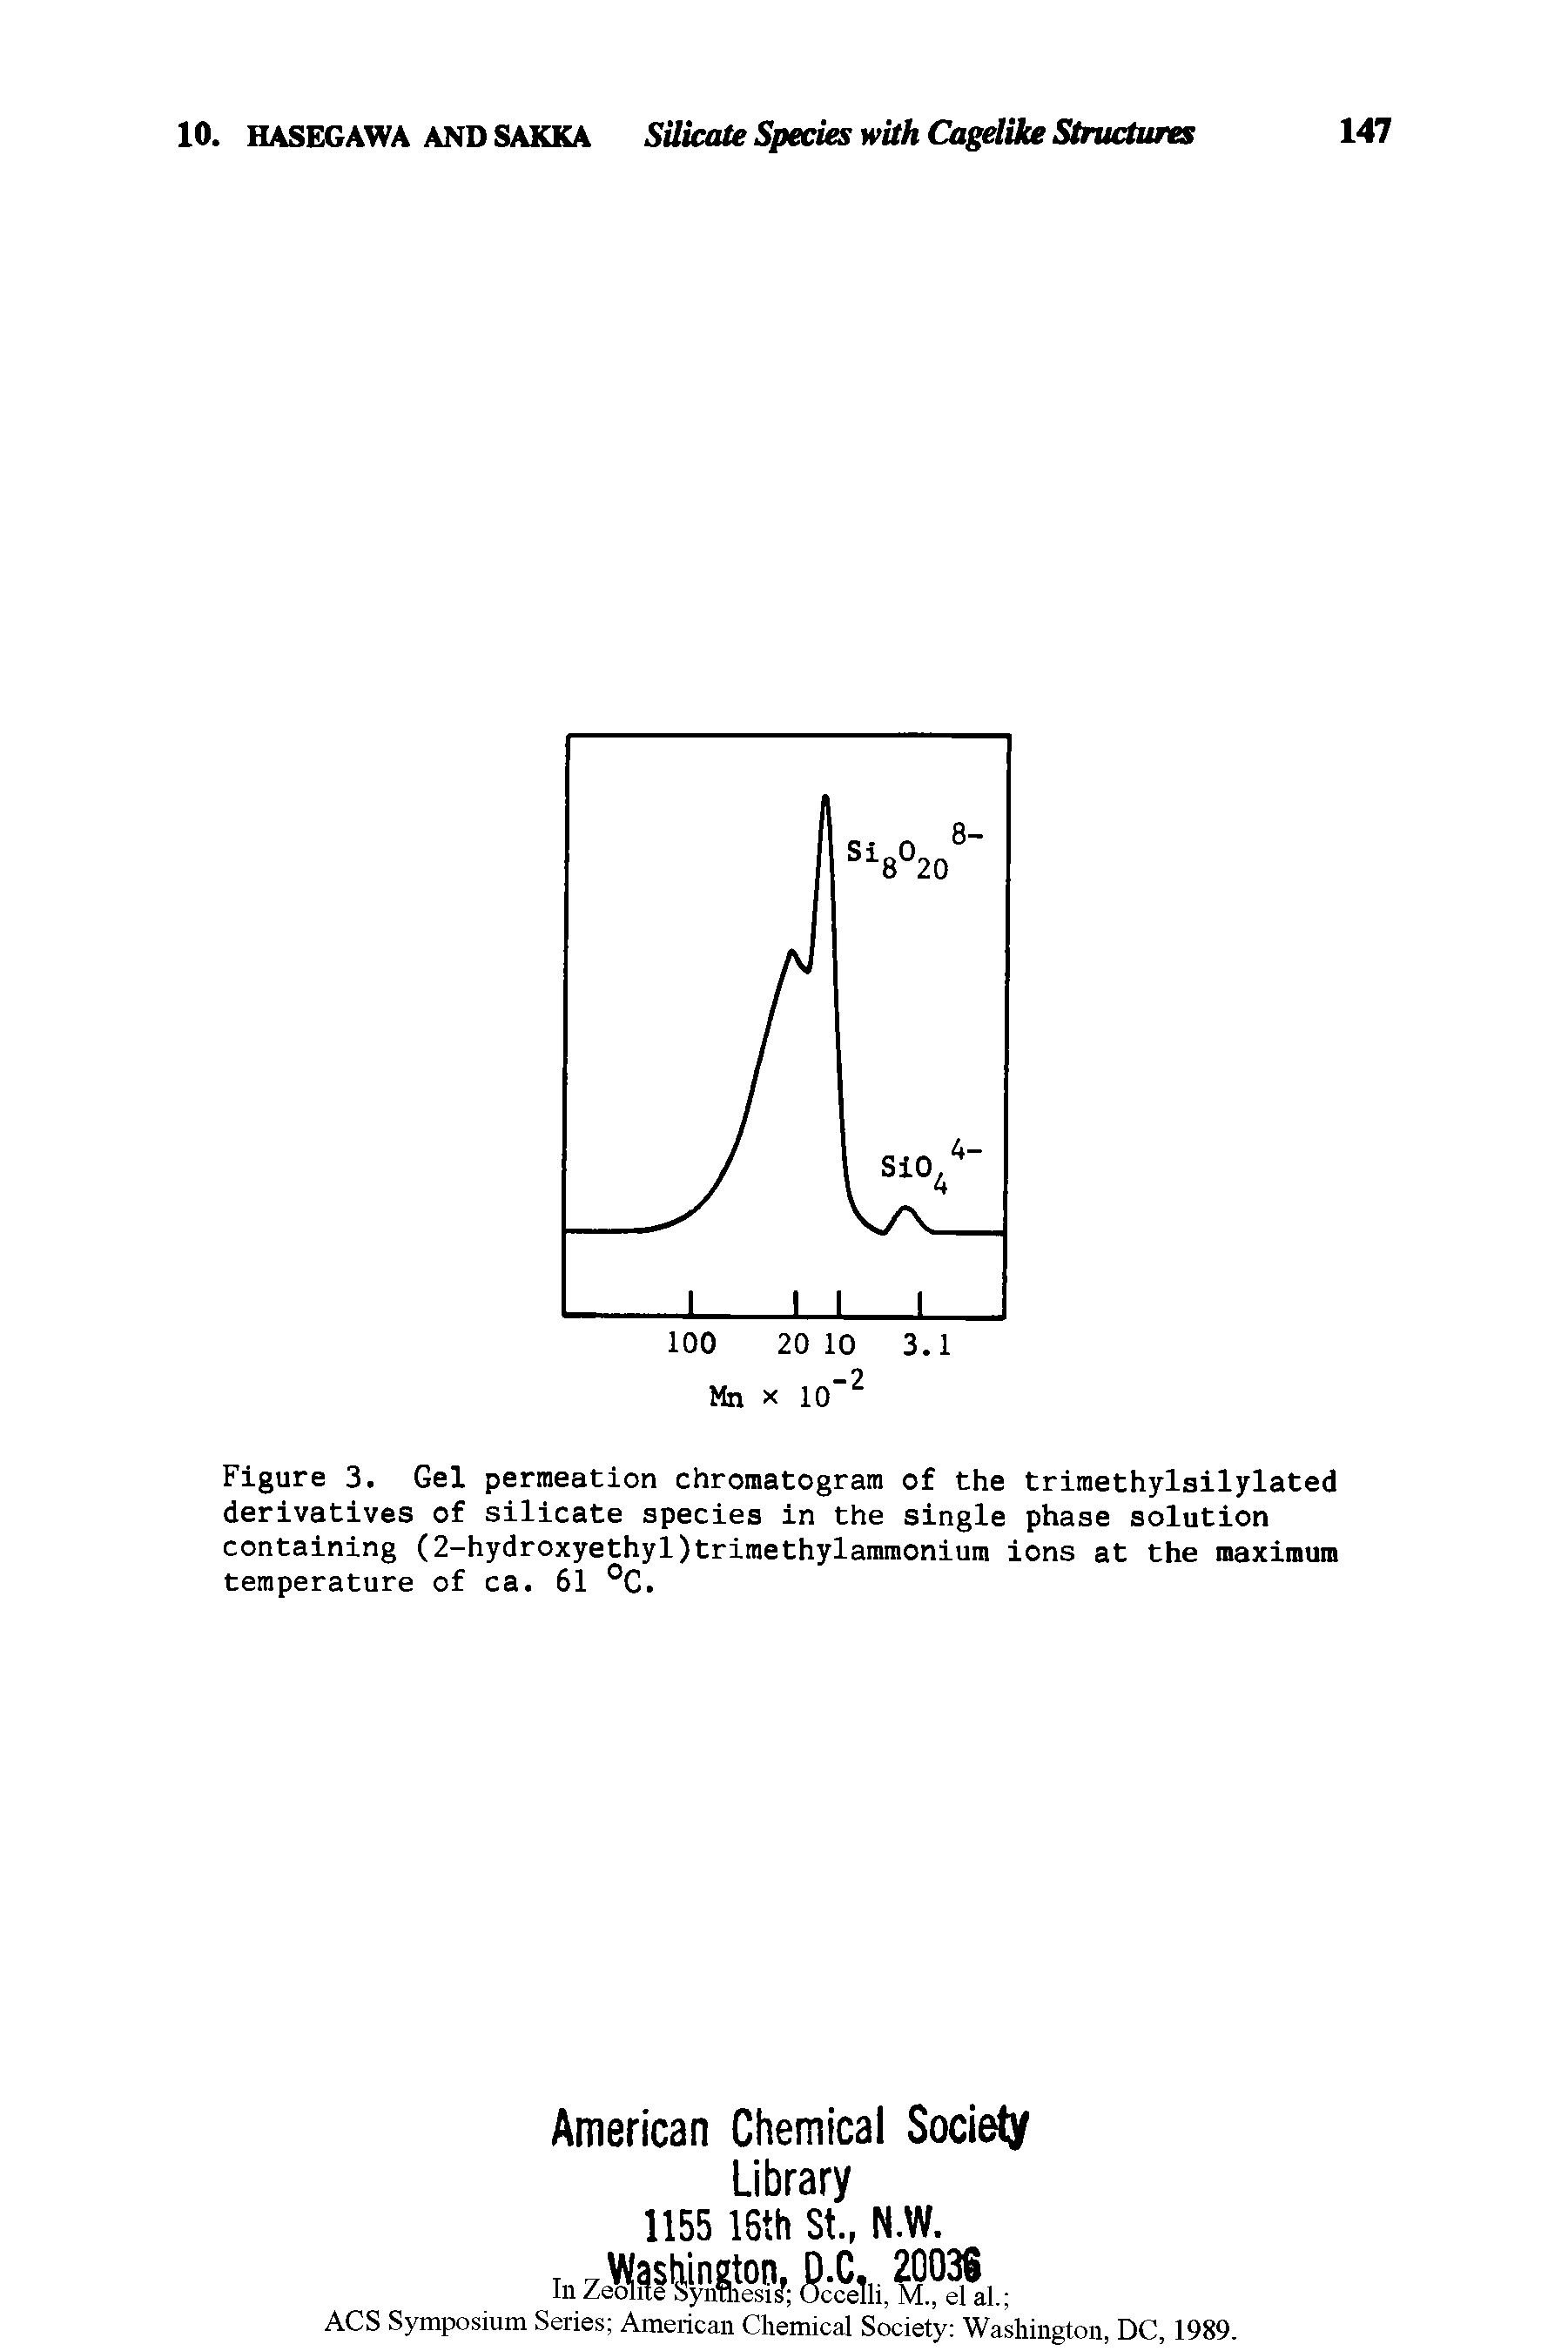 Figure 3. Gel permeation chromatogram of the trimethylsilylated derivatives of silicate species in the single phase solution containing (2-hydroxyethyl)trimethylammonium ions at the maximum temperature of ca. 61 °C.